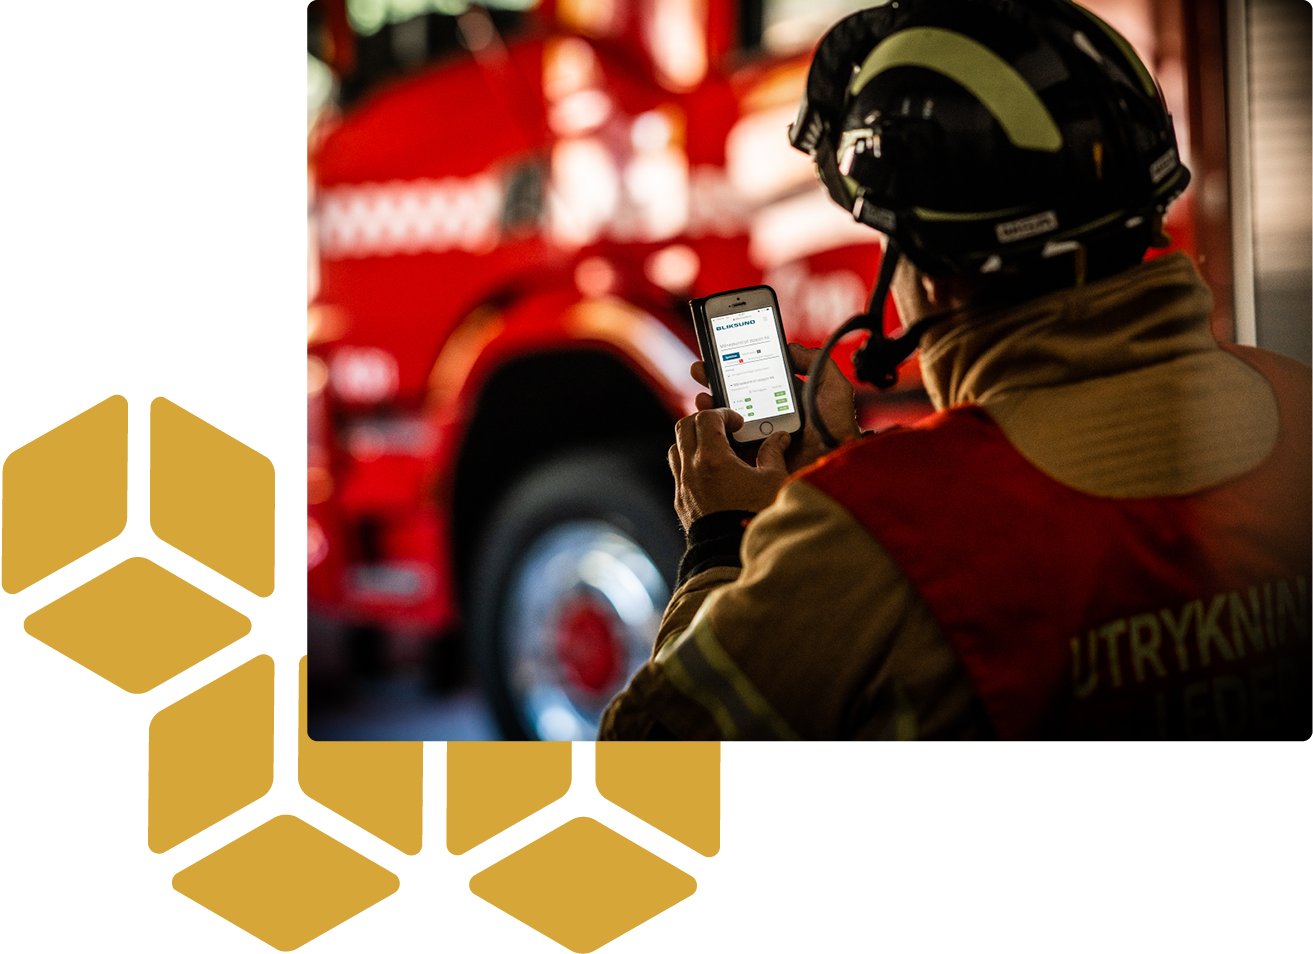 Firefighter use the GRID app - the operations management system